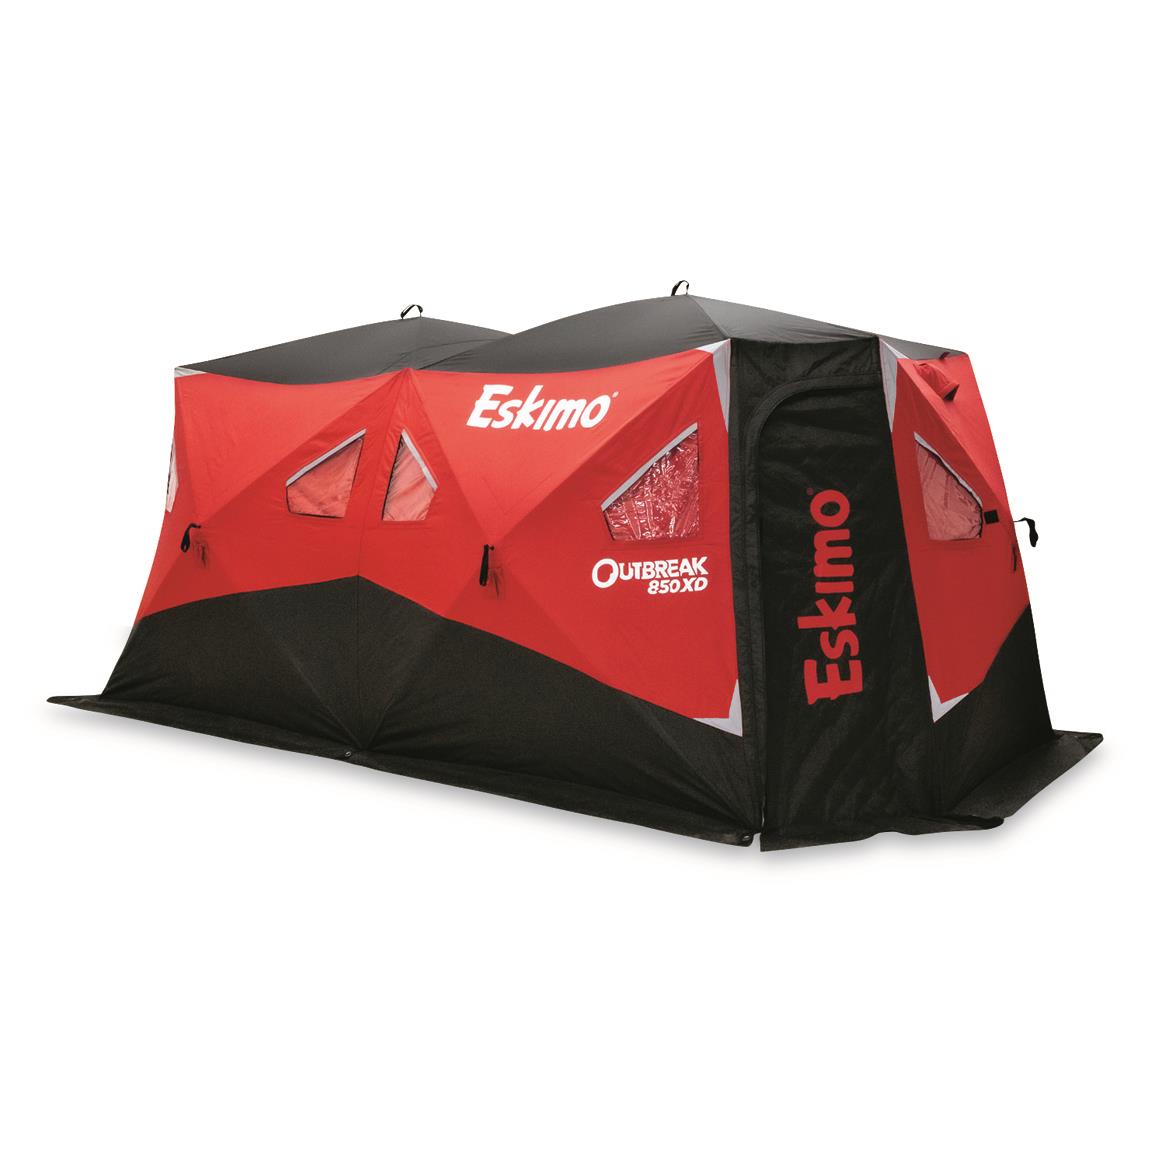 Eskimo Outbreak 850XD Insulated Hub-Style Ice Fishing Shelter, 9-Person